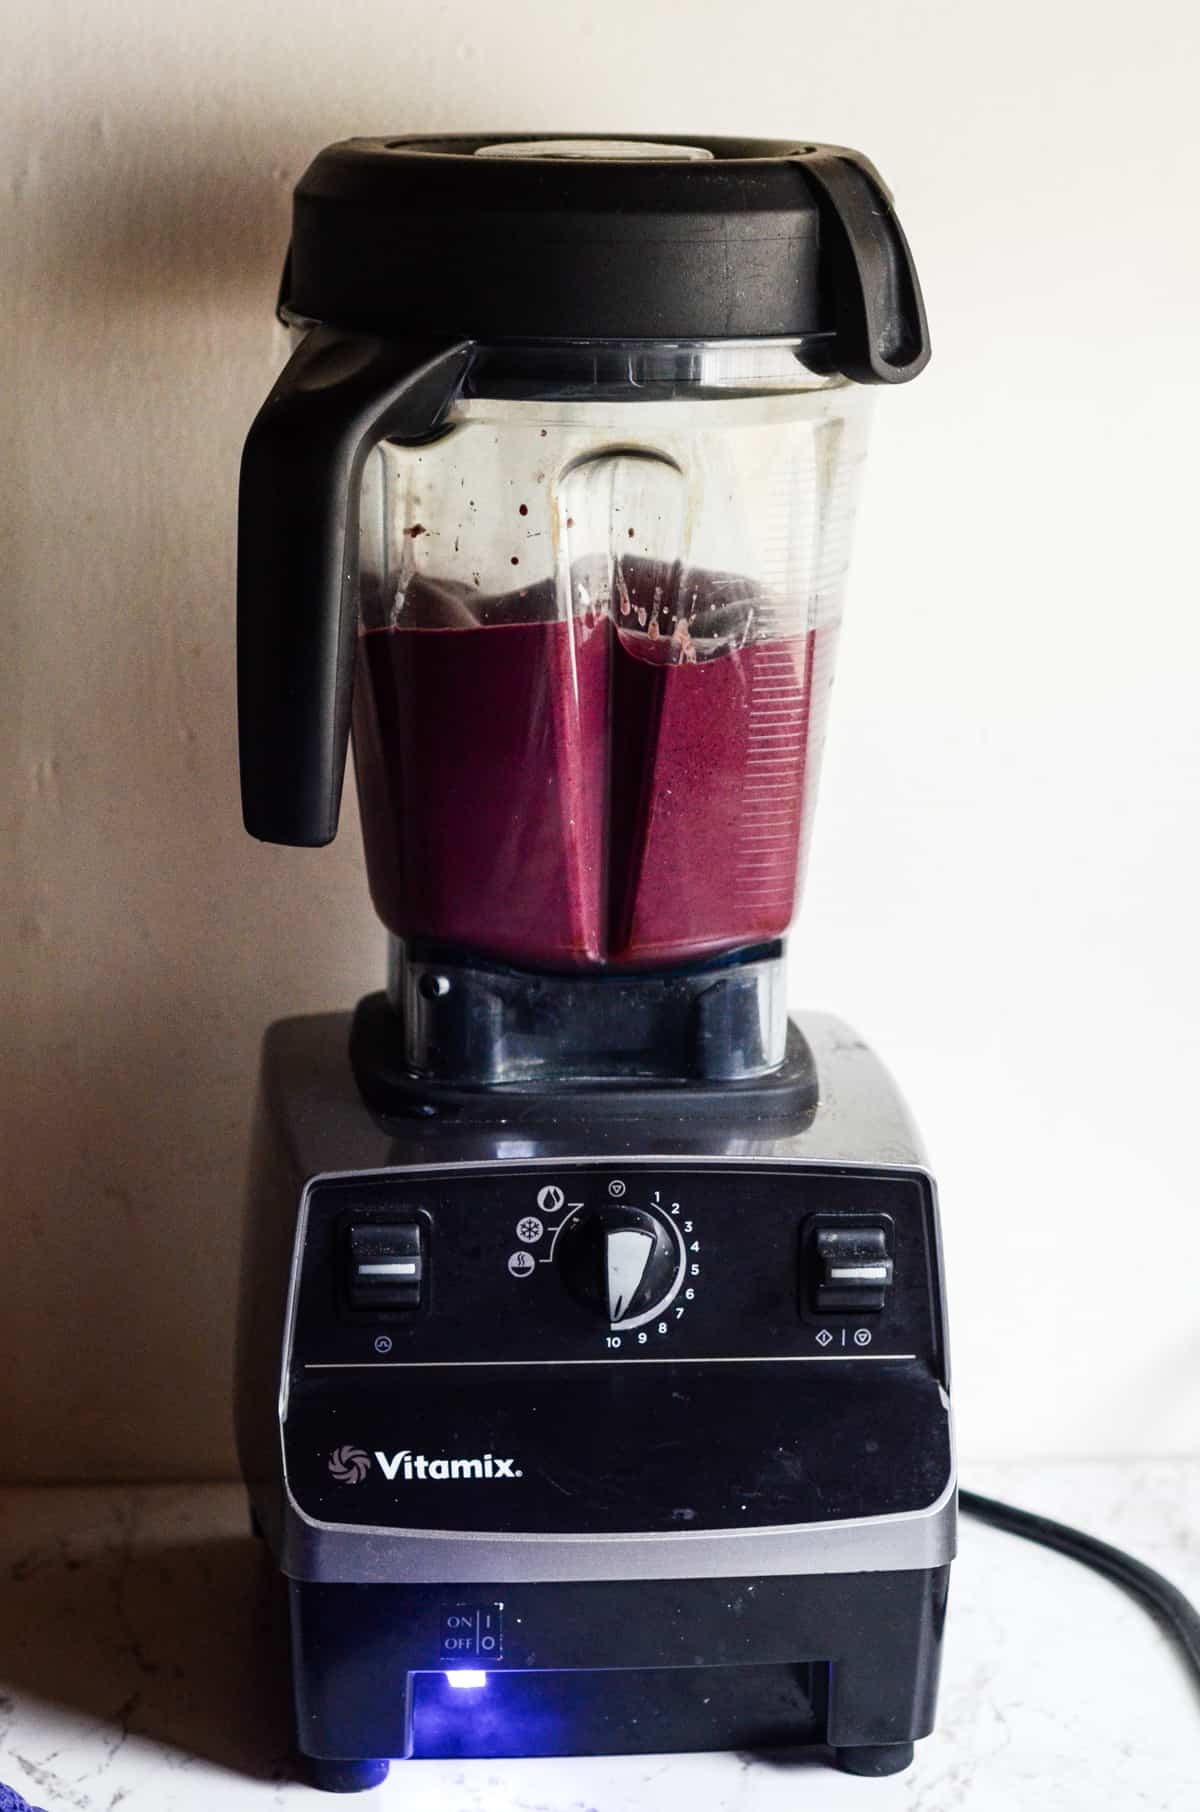 Vitamix with purple smoothie in it being blended.